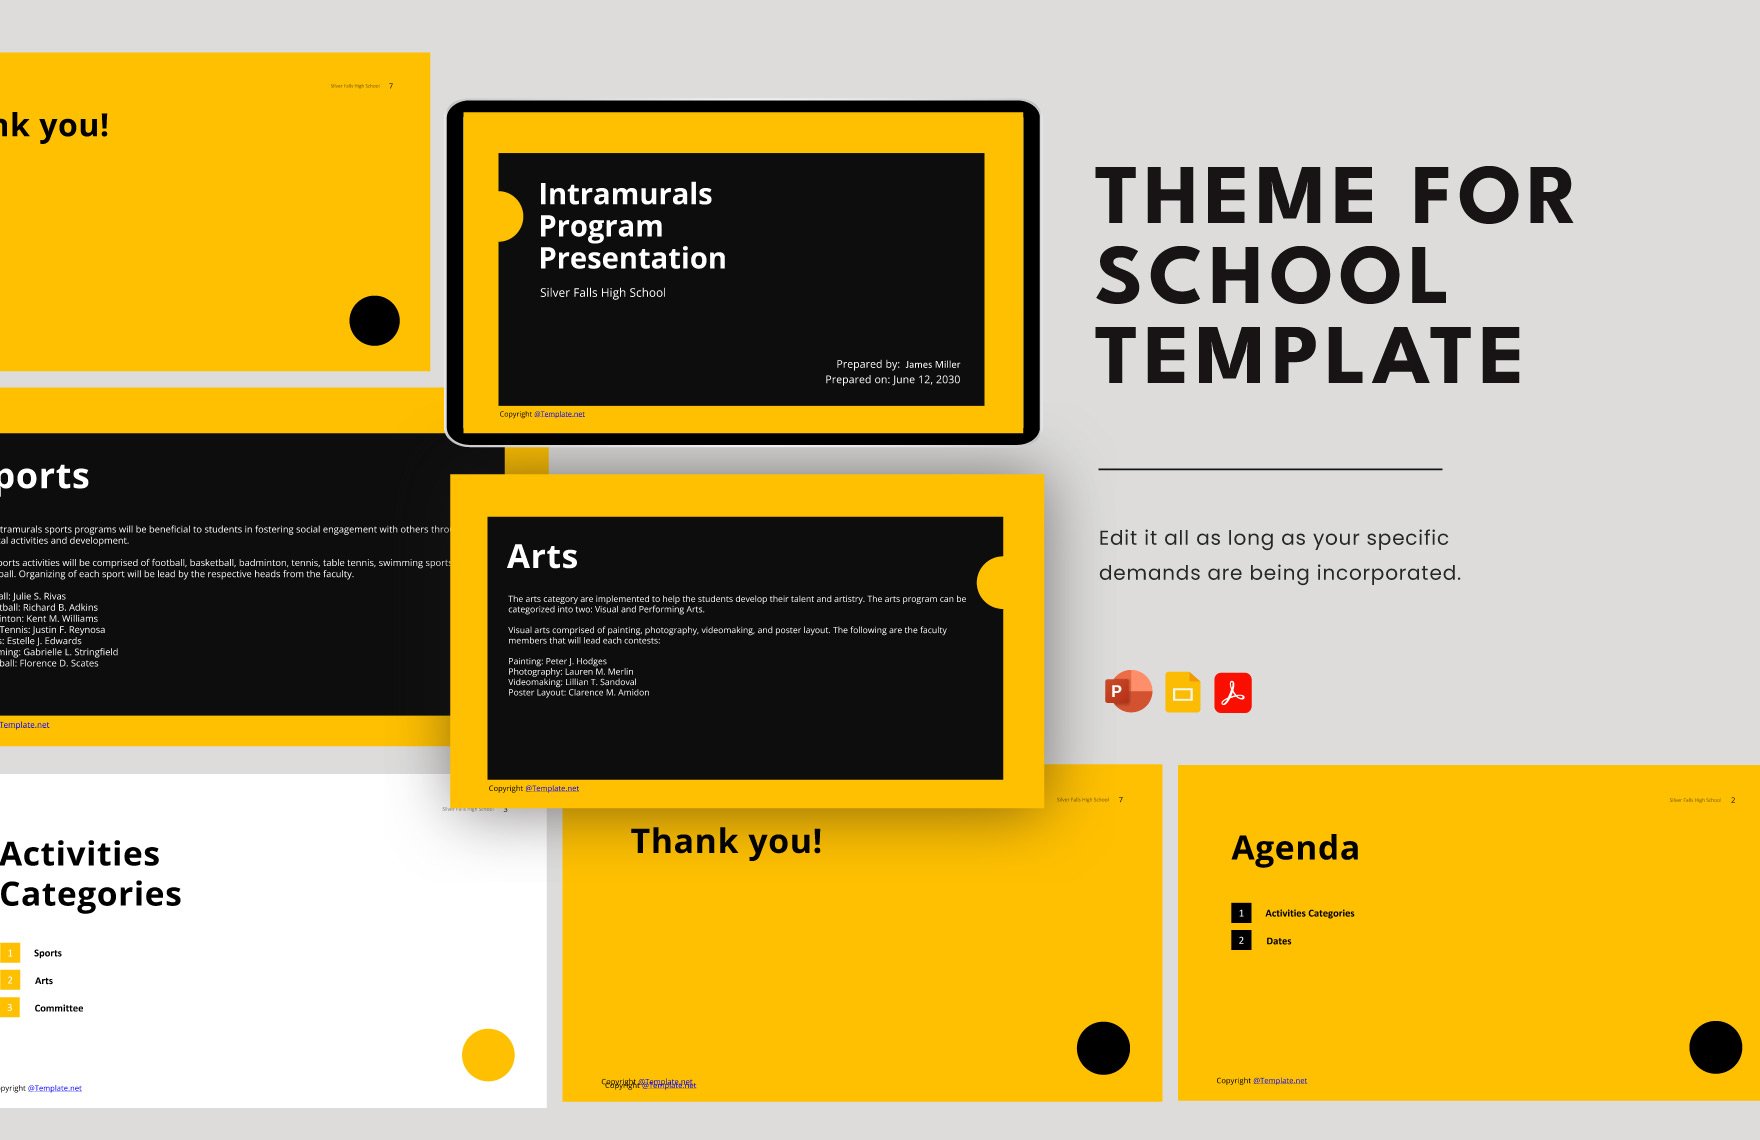 Theme for School Template